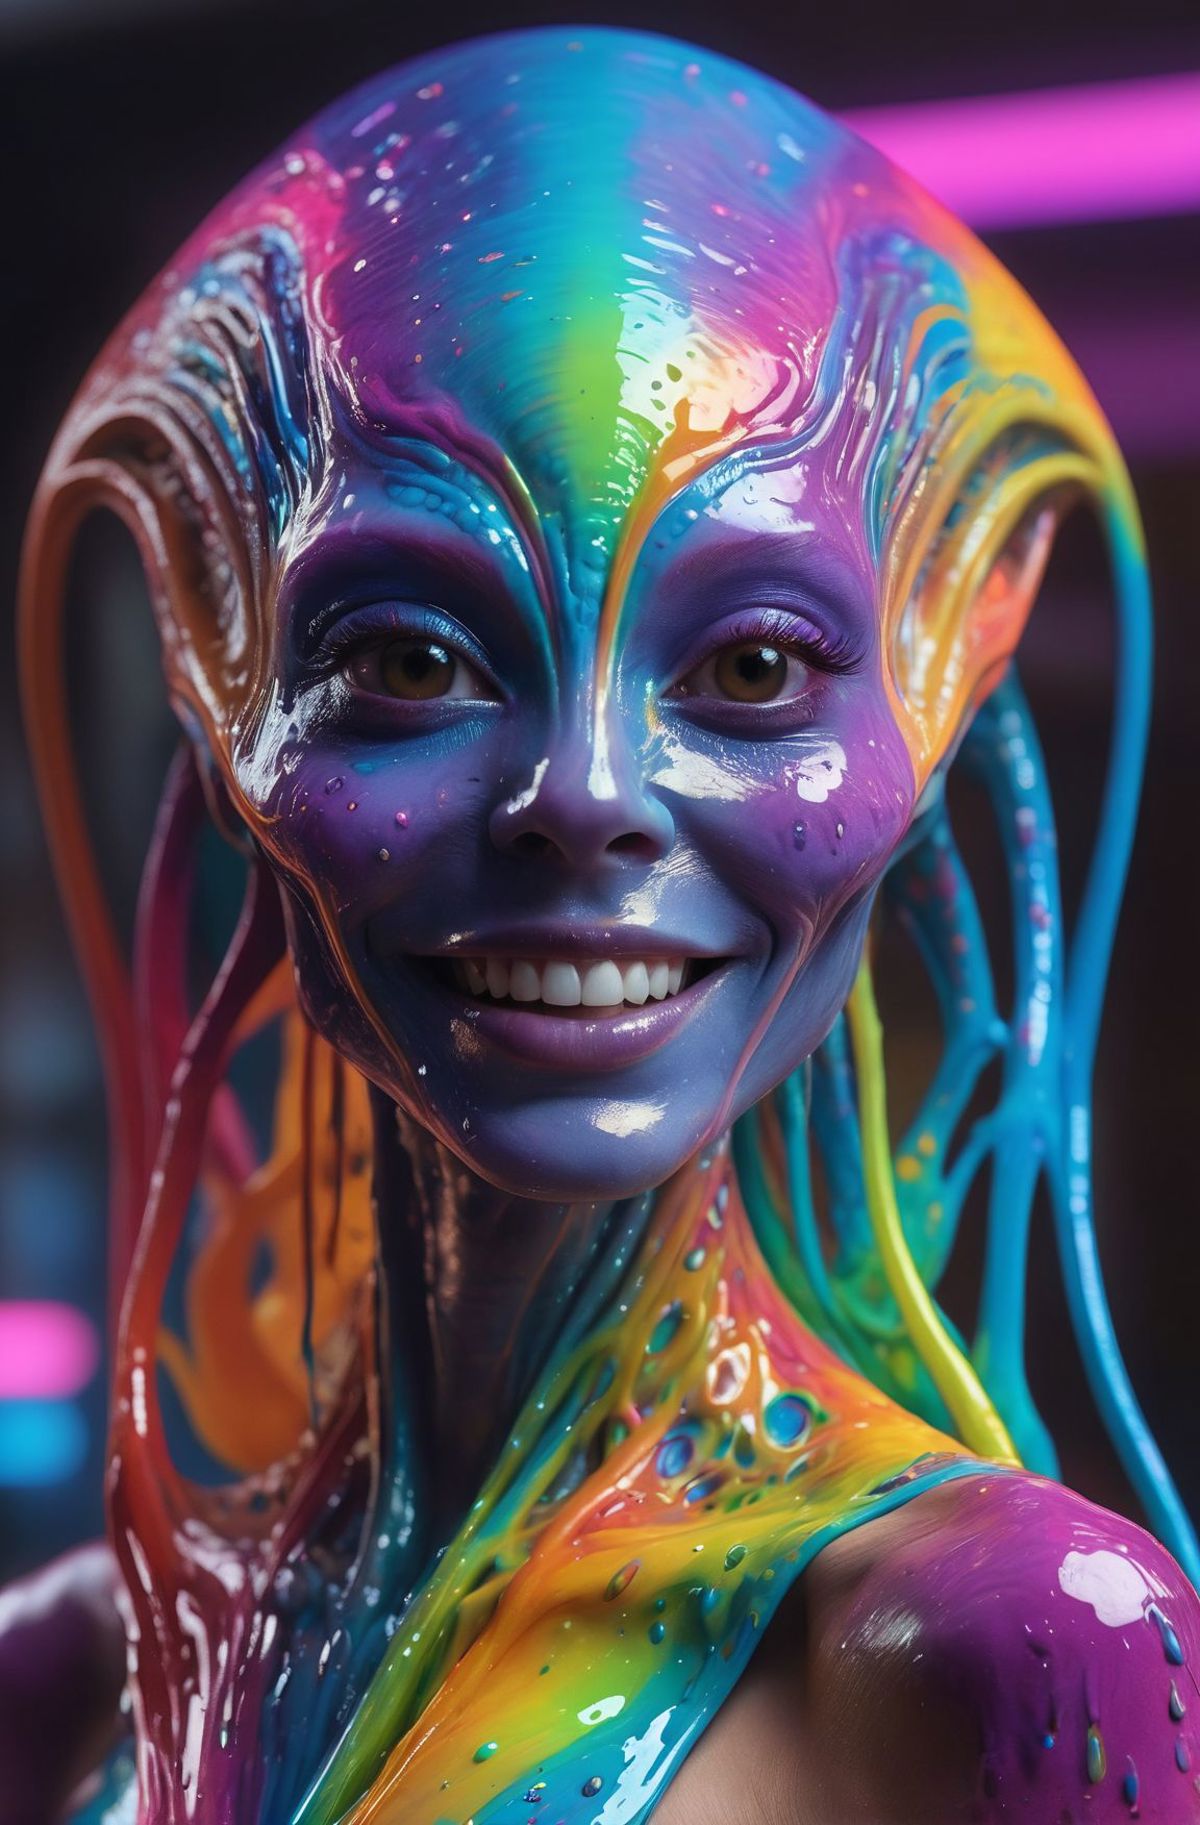 A smiling, multi-colored alien sculpture with purple and green skin.